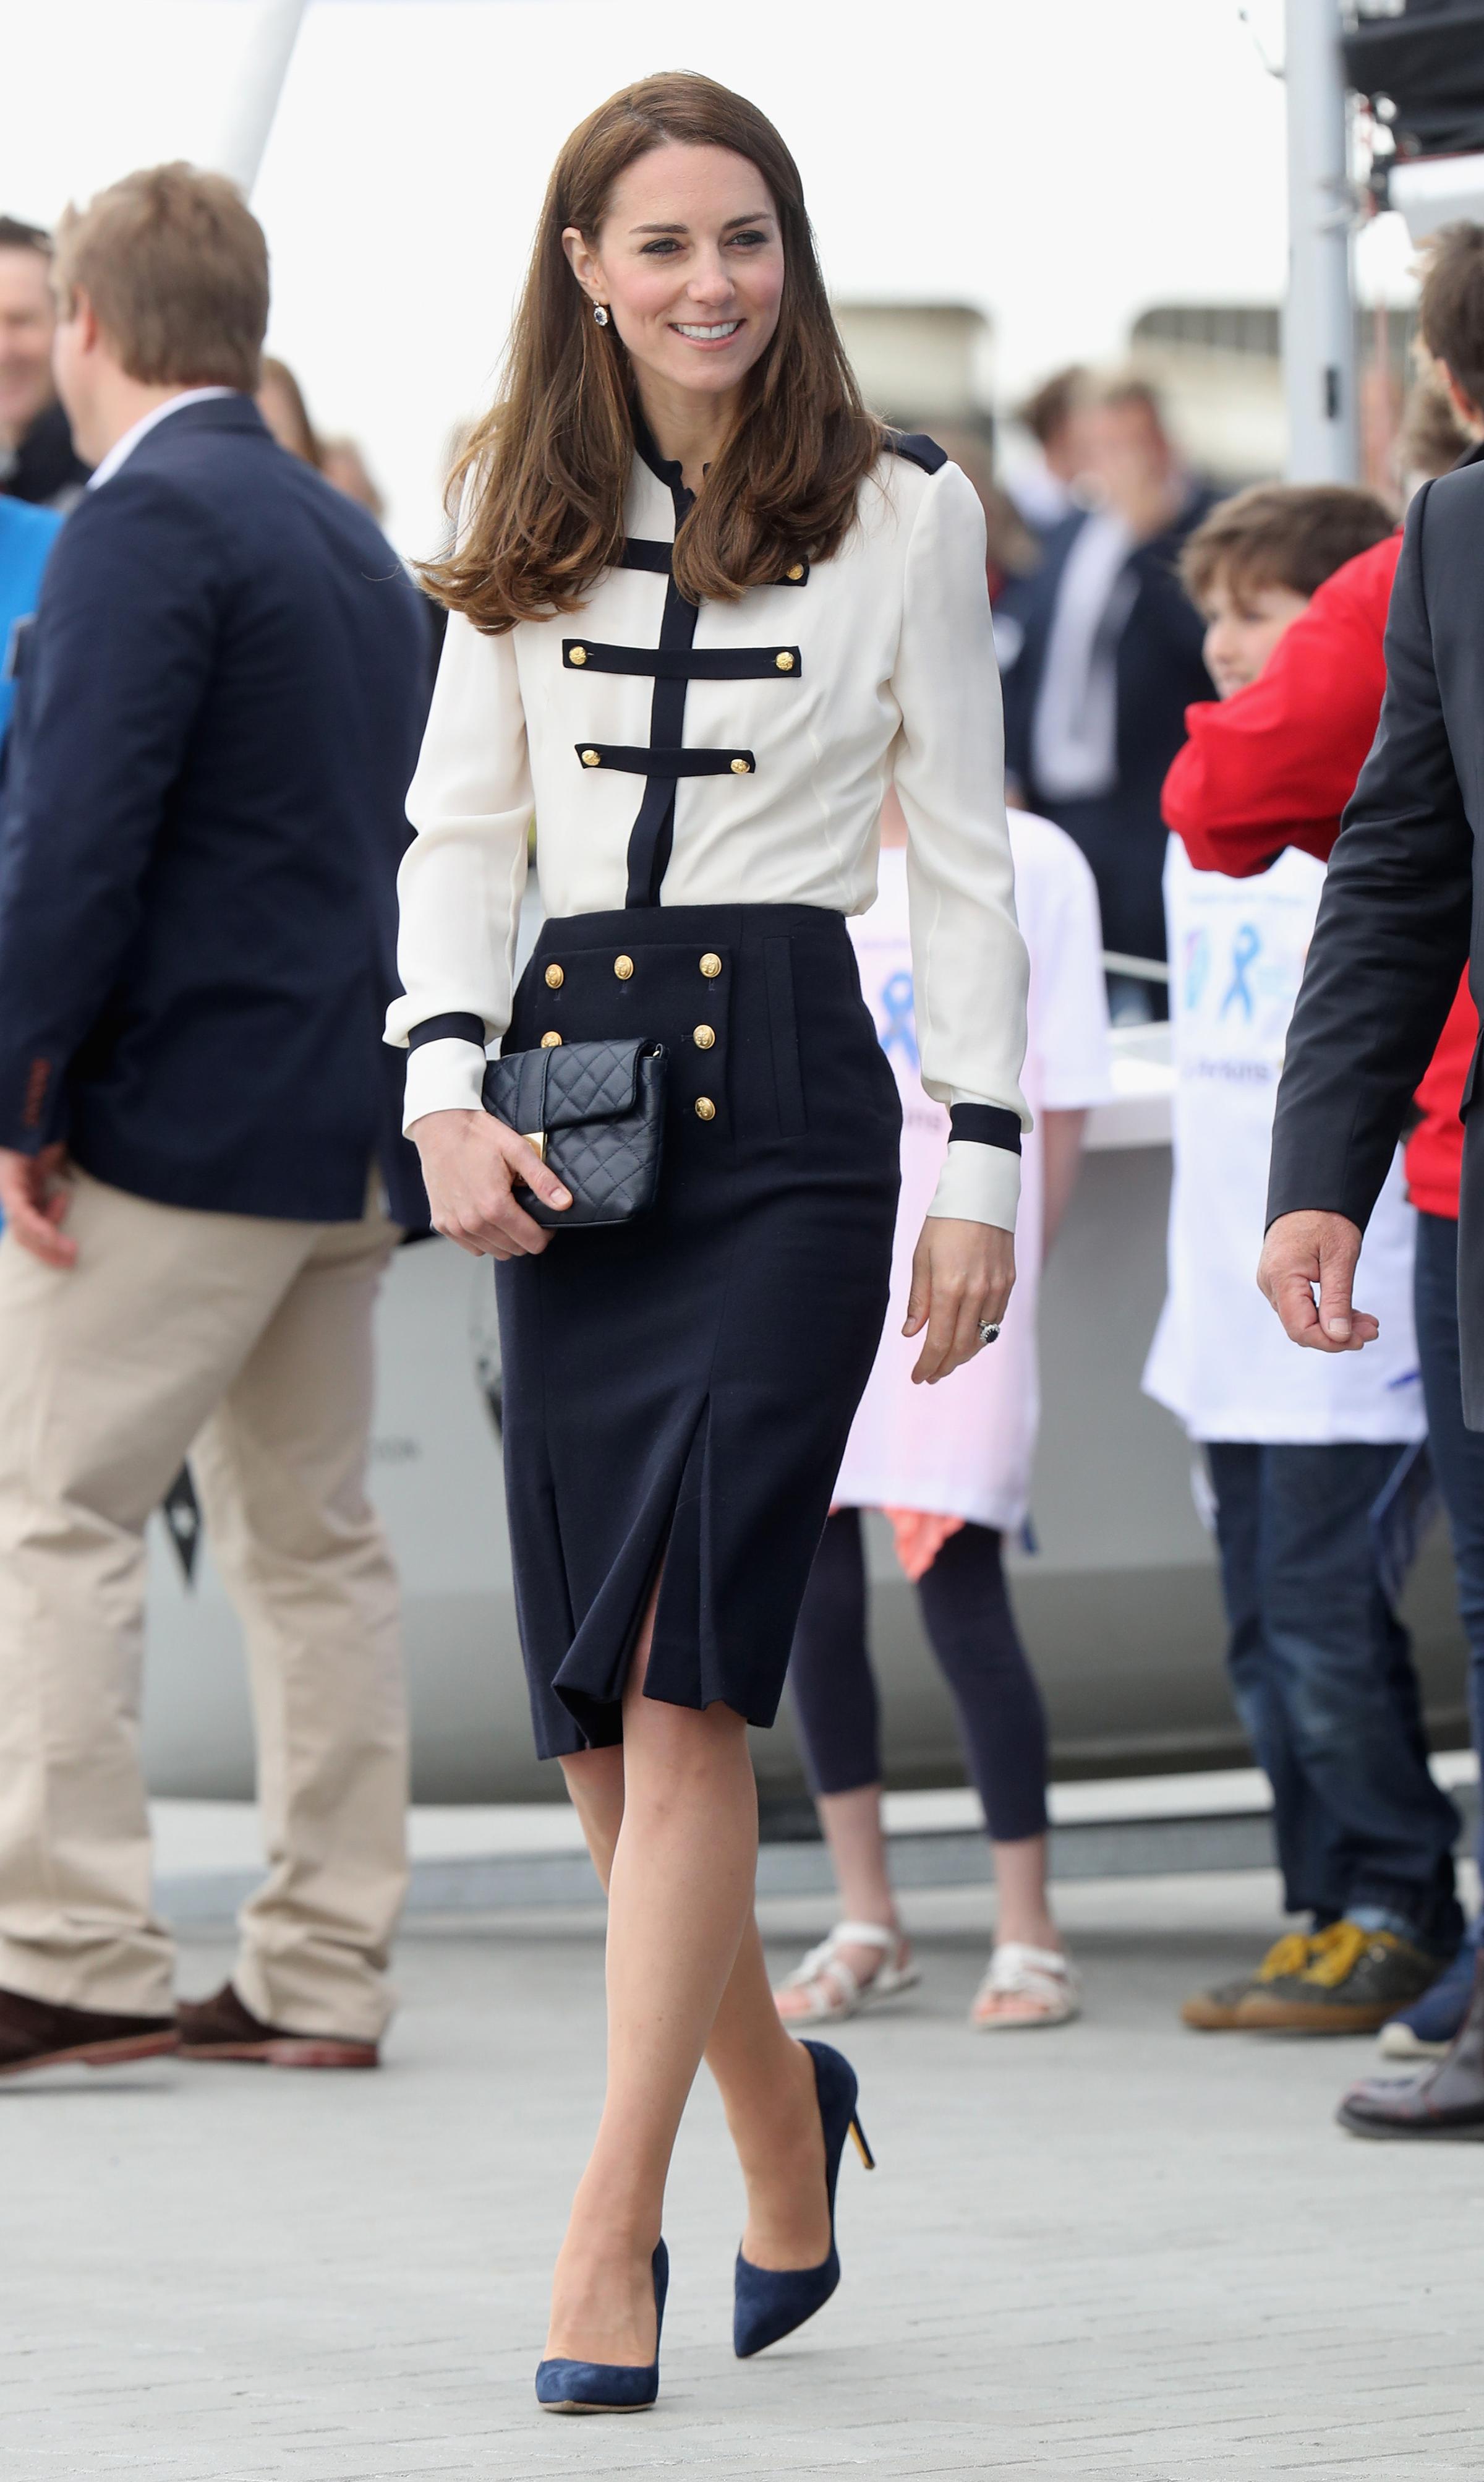 Catherine, Duchess of Cambridge, patron of the 1851 Trust, arrives at Land Rover BAR in Portsmouth, England, on May 20, 2016.